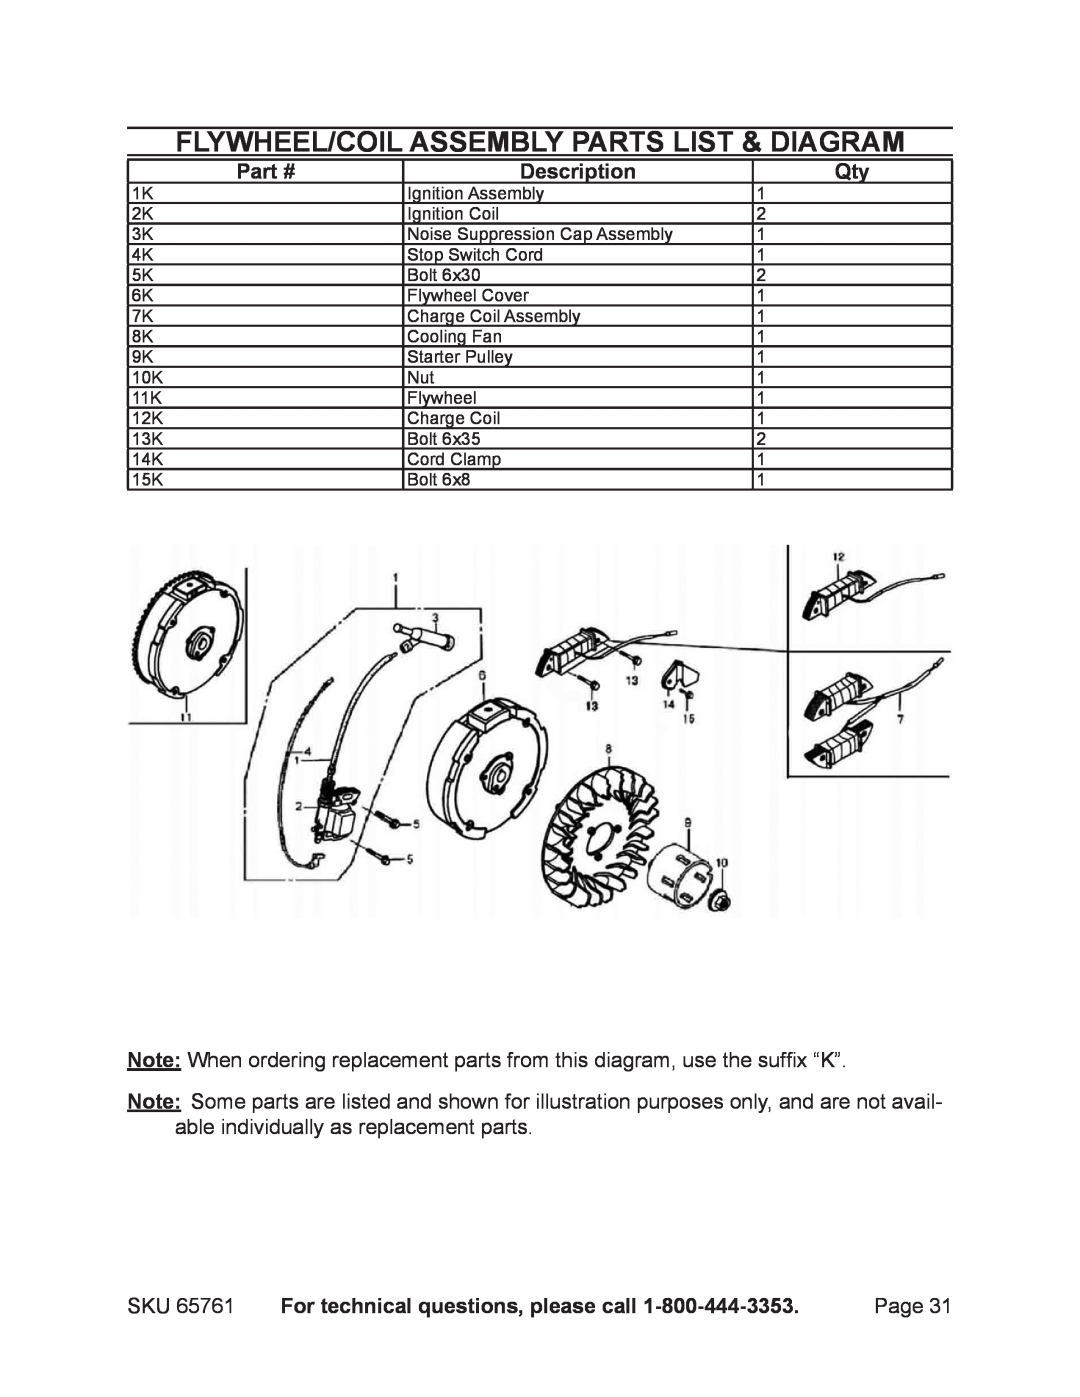 Harbor Freight Tools 65761 Flywheel/coil assembly parts list & diagram, Description, For technical questions, please call 